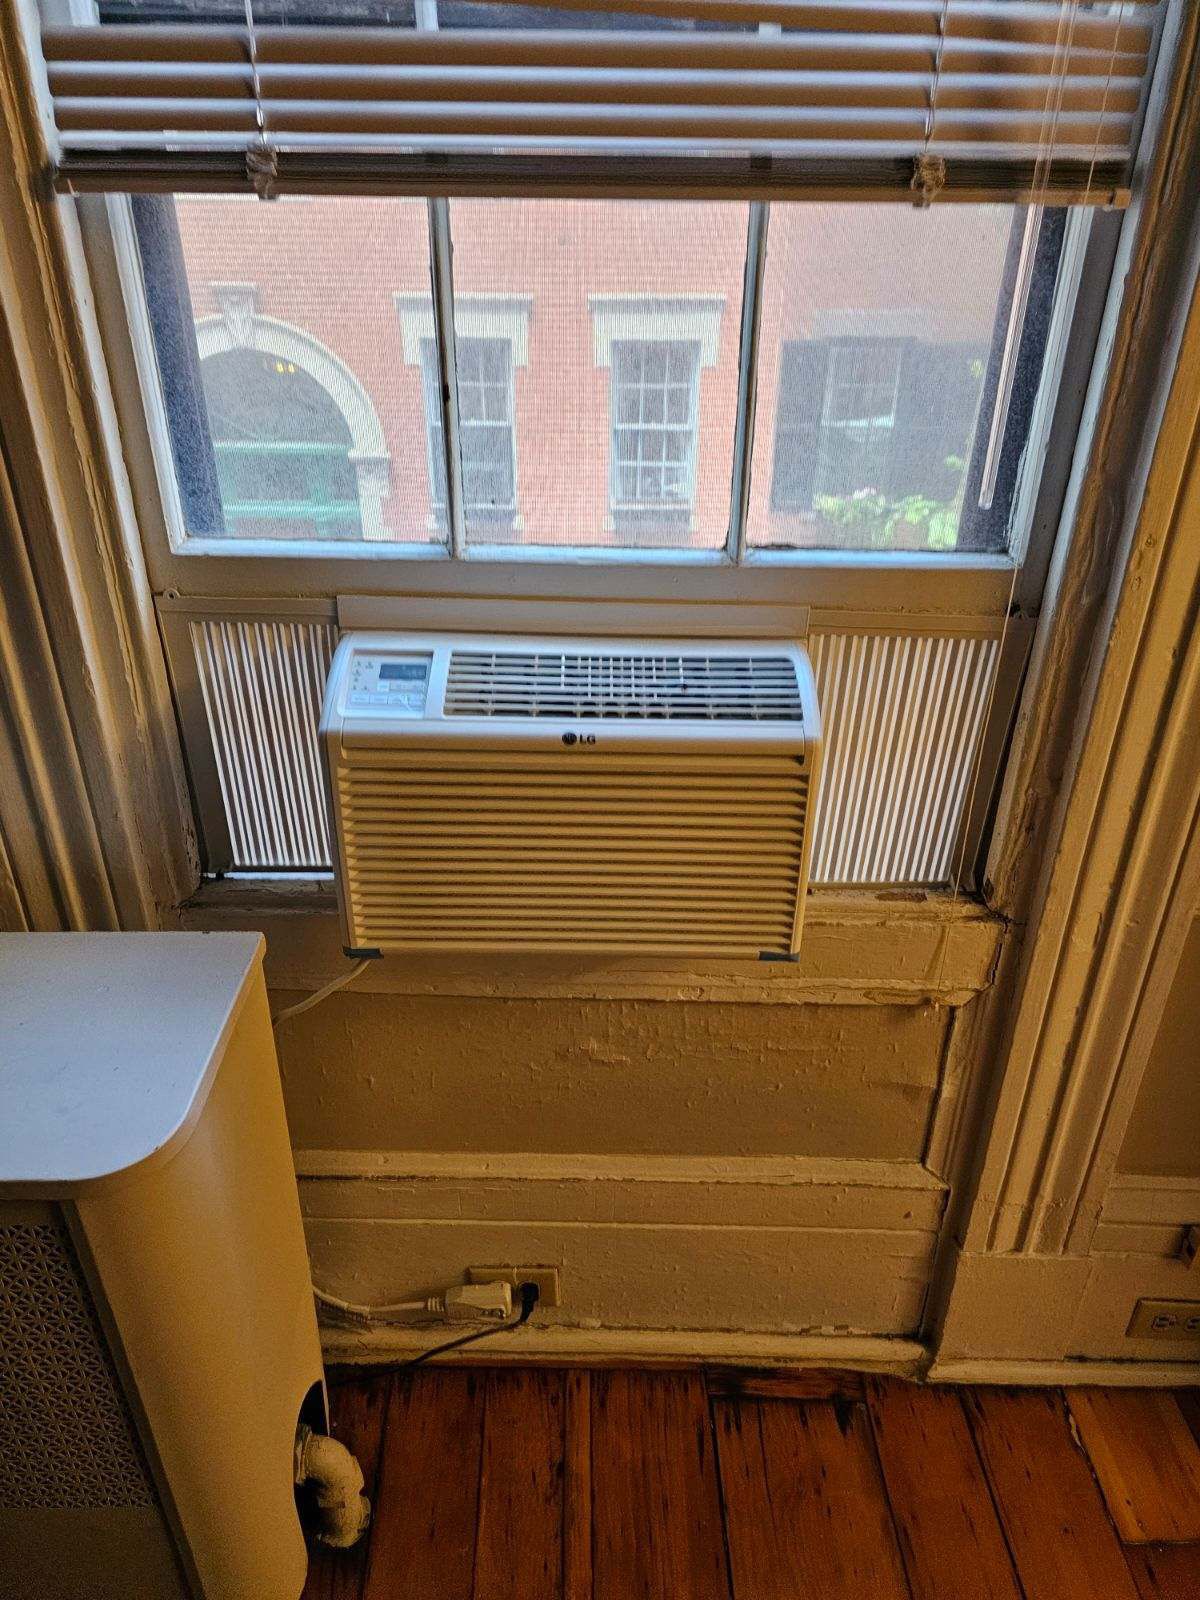 Window Mounted Air Conditioner Units (ac)